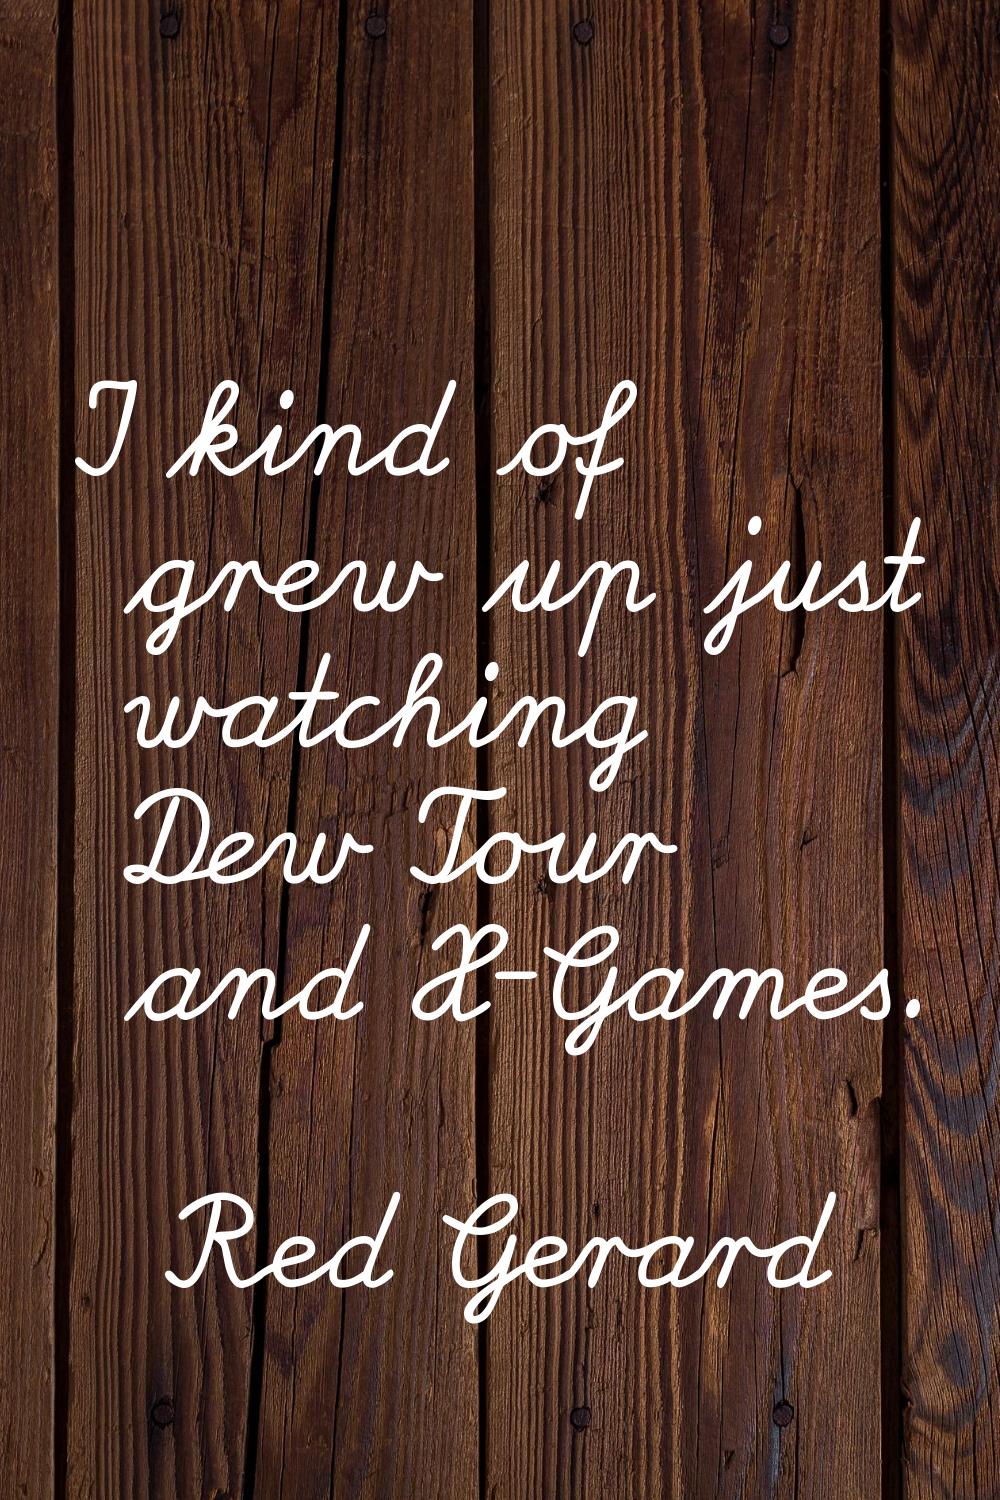 I kind of grew up just watching Dew Tour and X-Games.